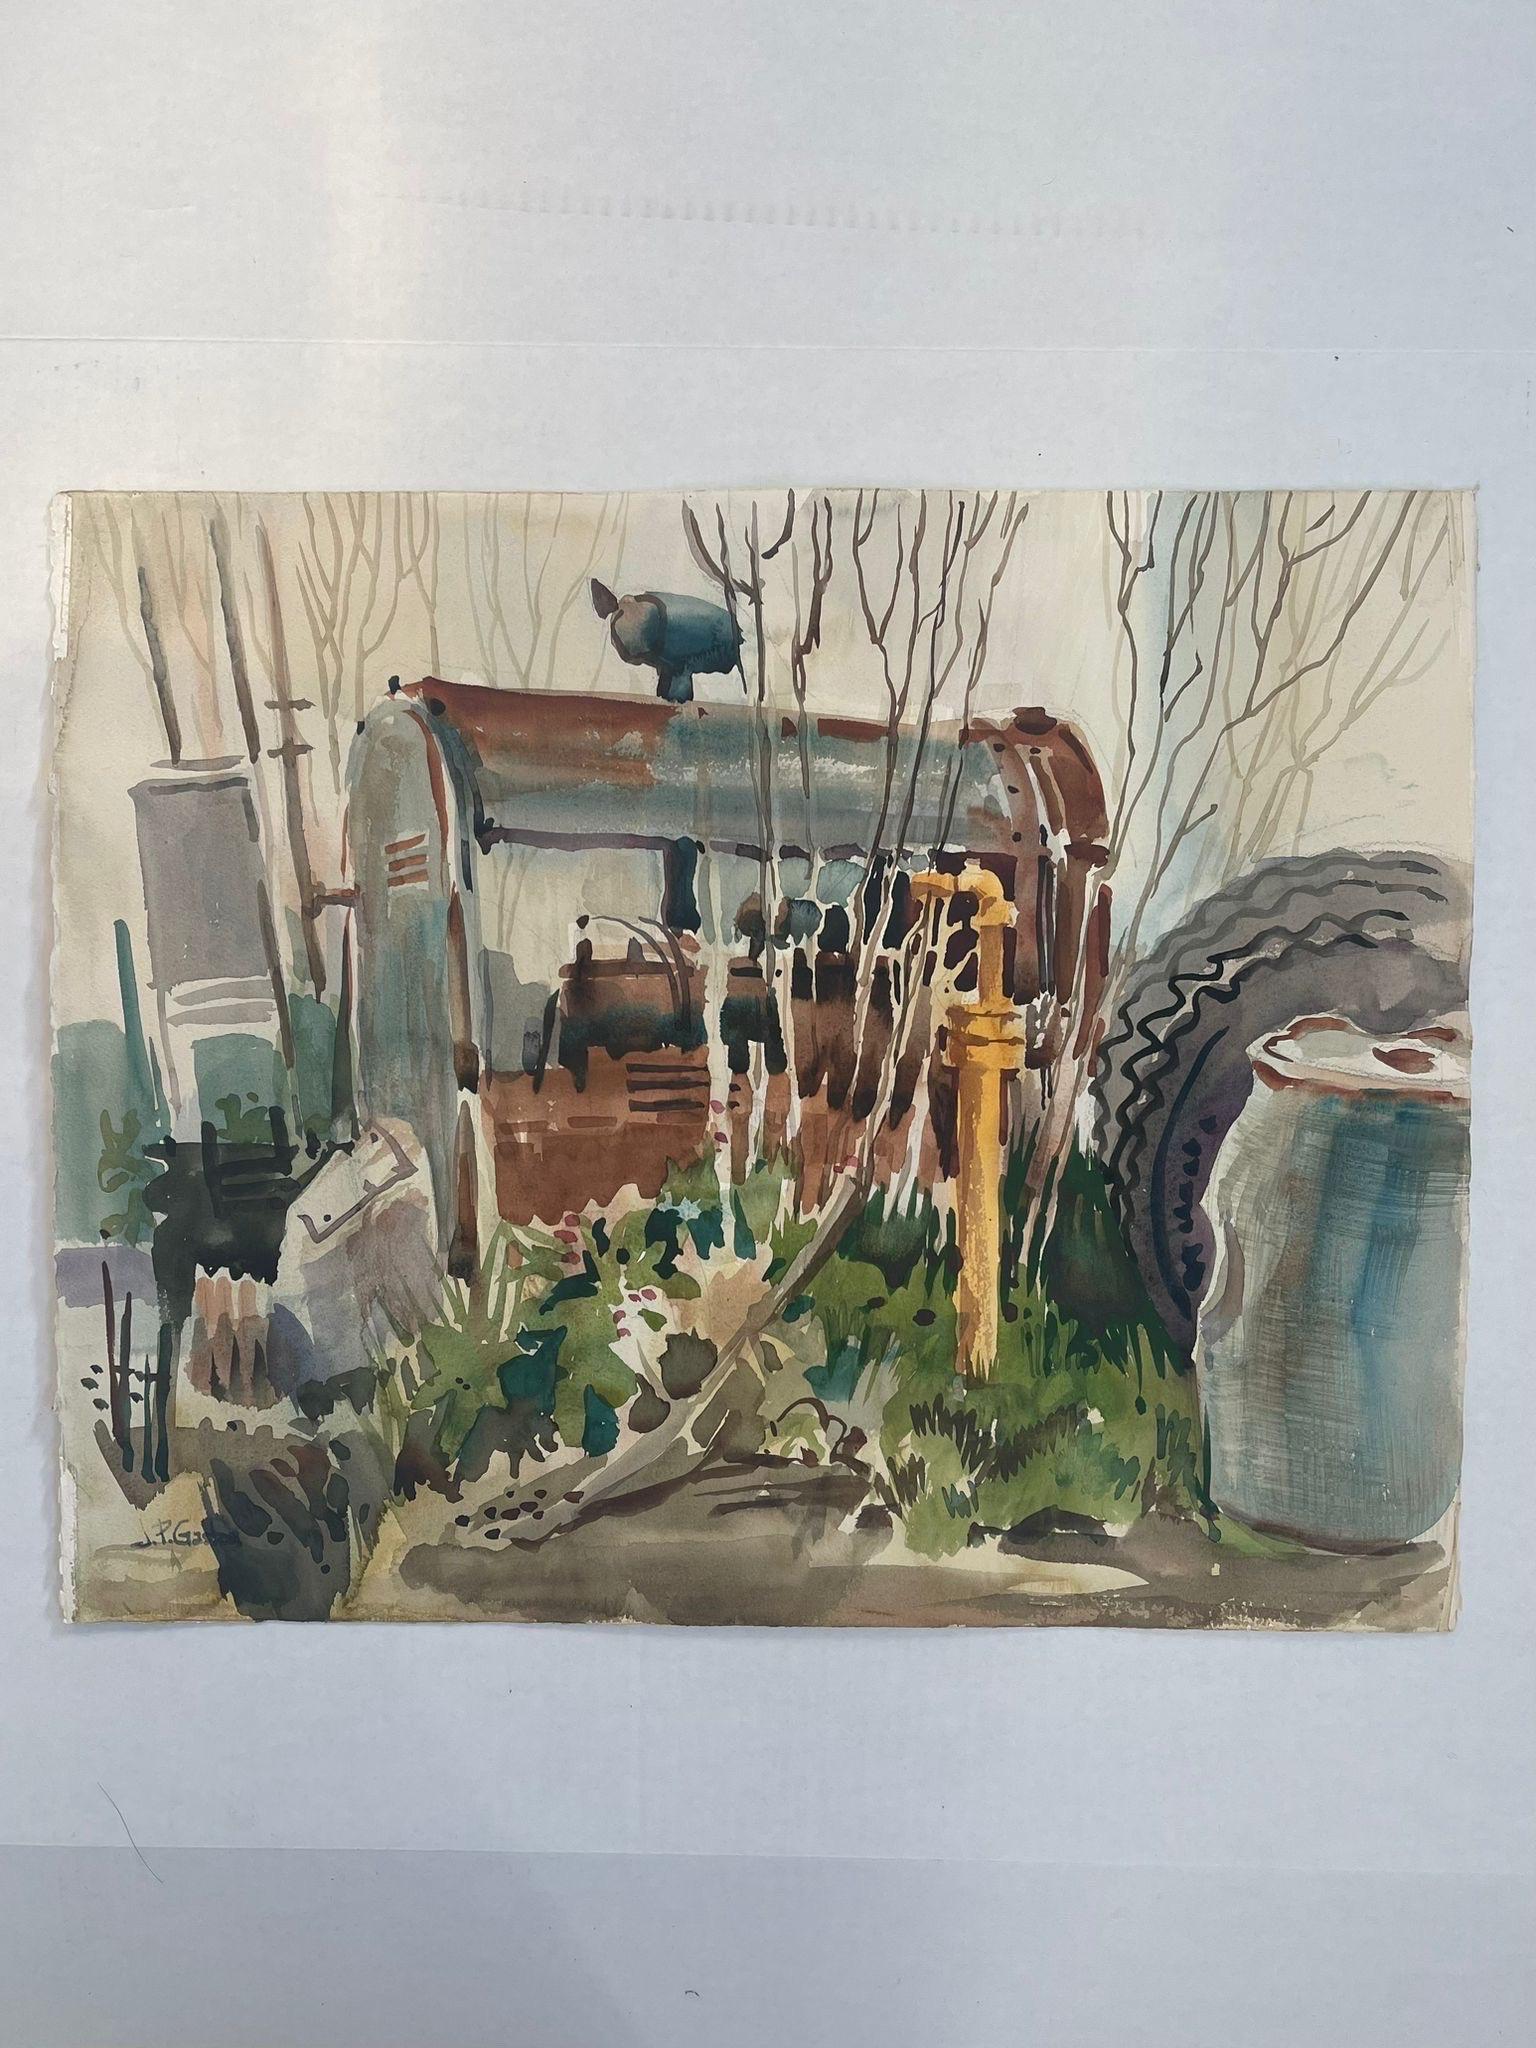 Vintage Artwork of Abstract Yard Landscape. Possibly Watercolor on Paper.Signed JP Gaston as Pictured.

Dimensions. 15 W ; 1/8 D ; 23 H